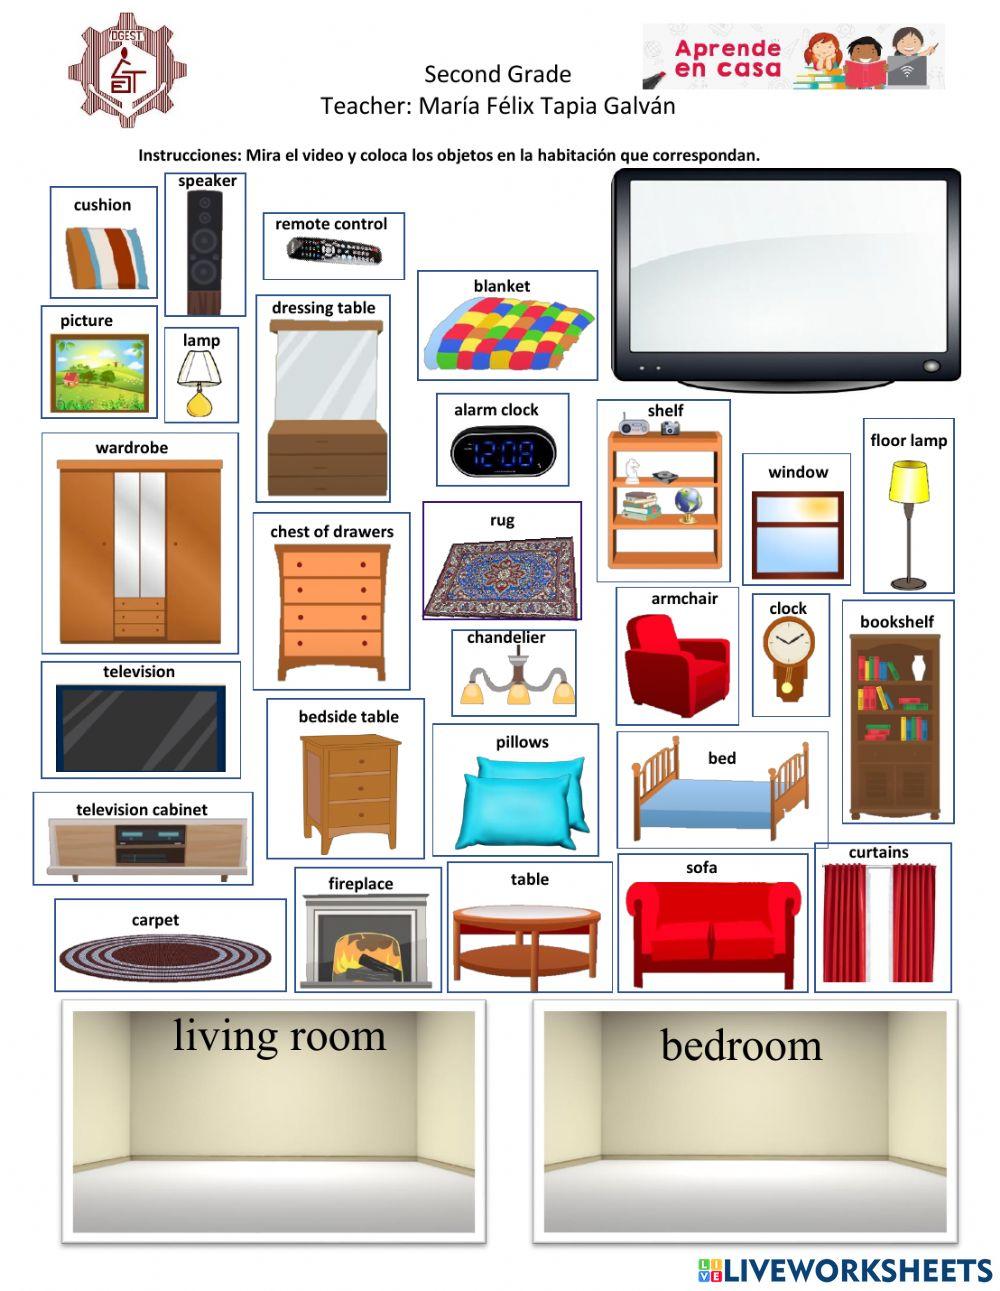 Home objects